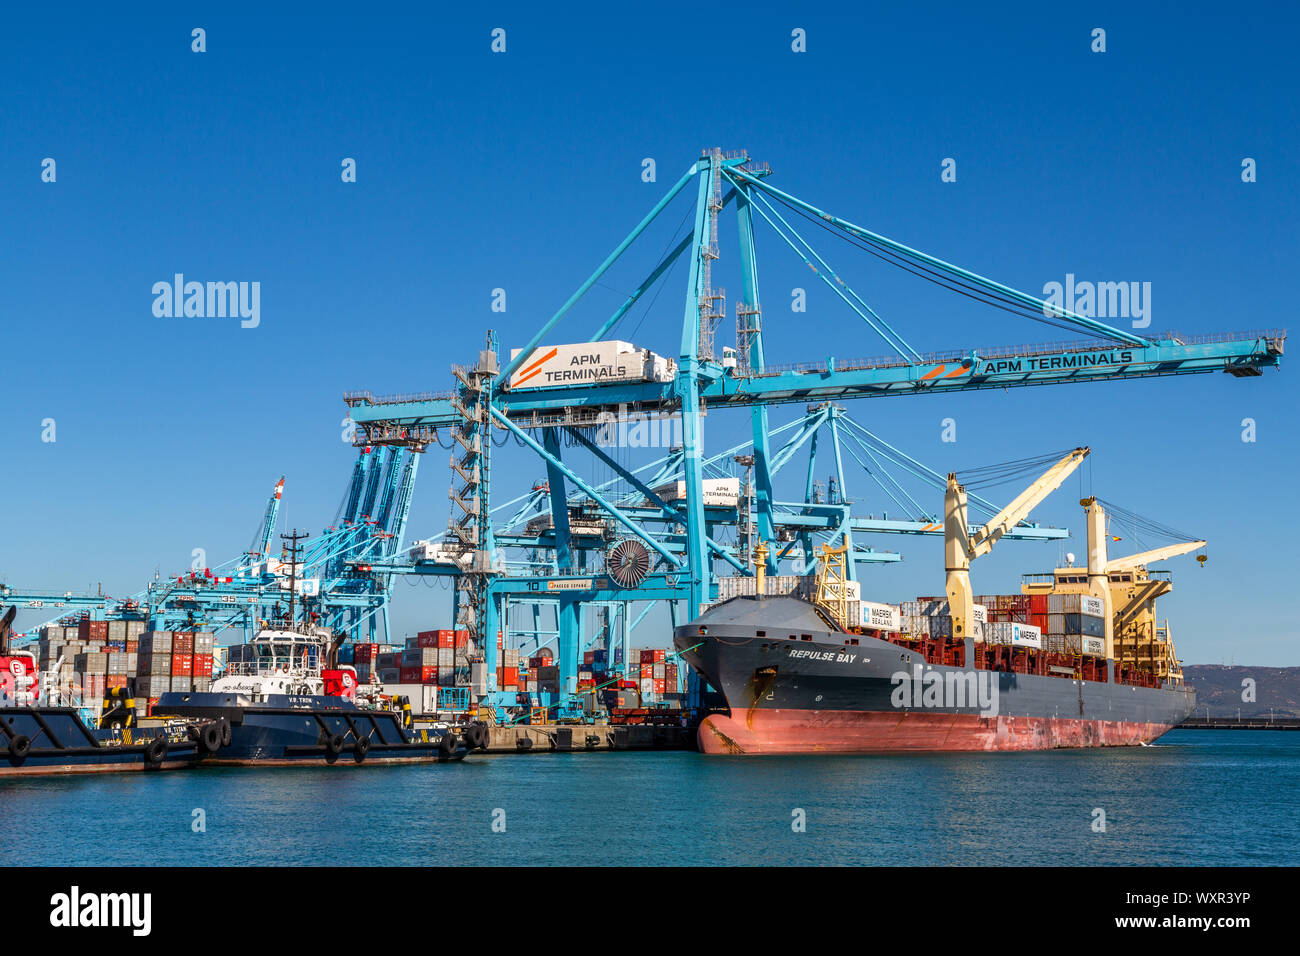 A close up image of a large container ship being loaded by cranes with blue sky background docked in the port of Algeciras, Spain Stock Photo